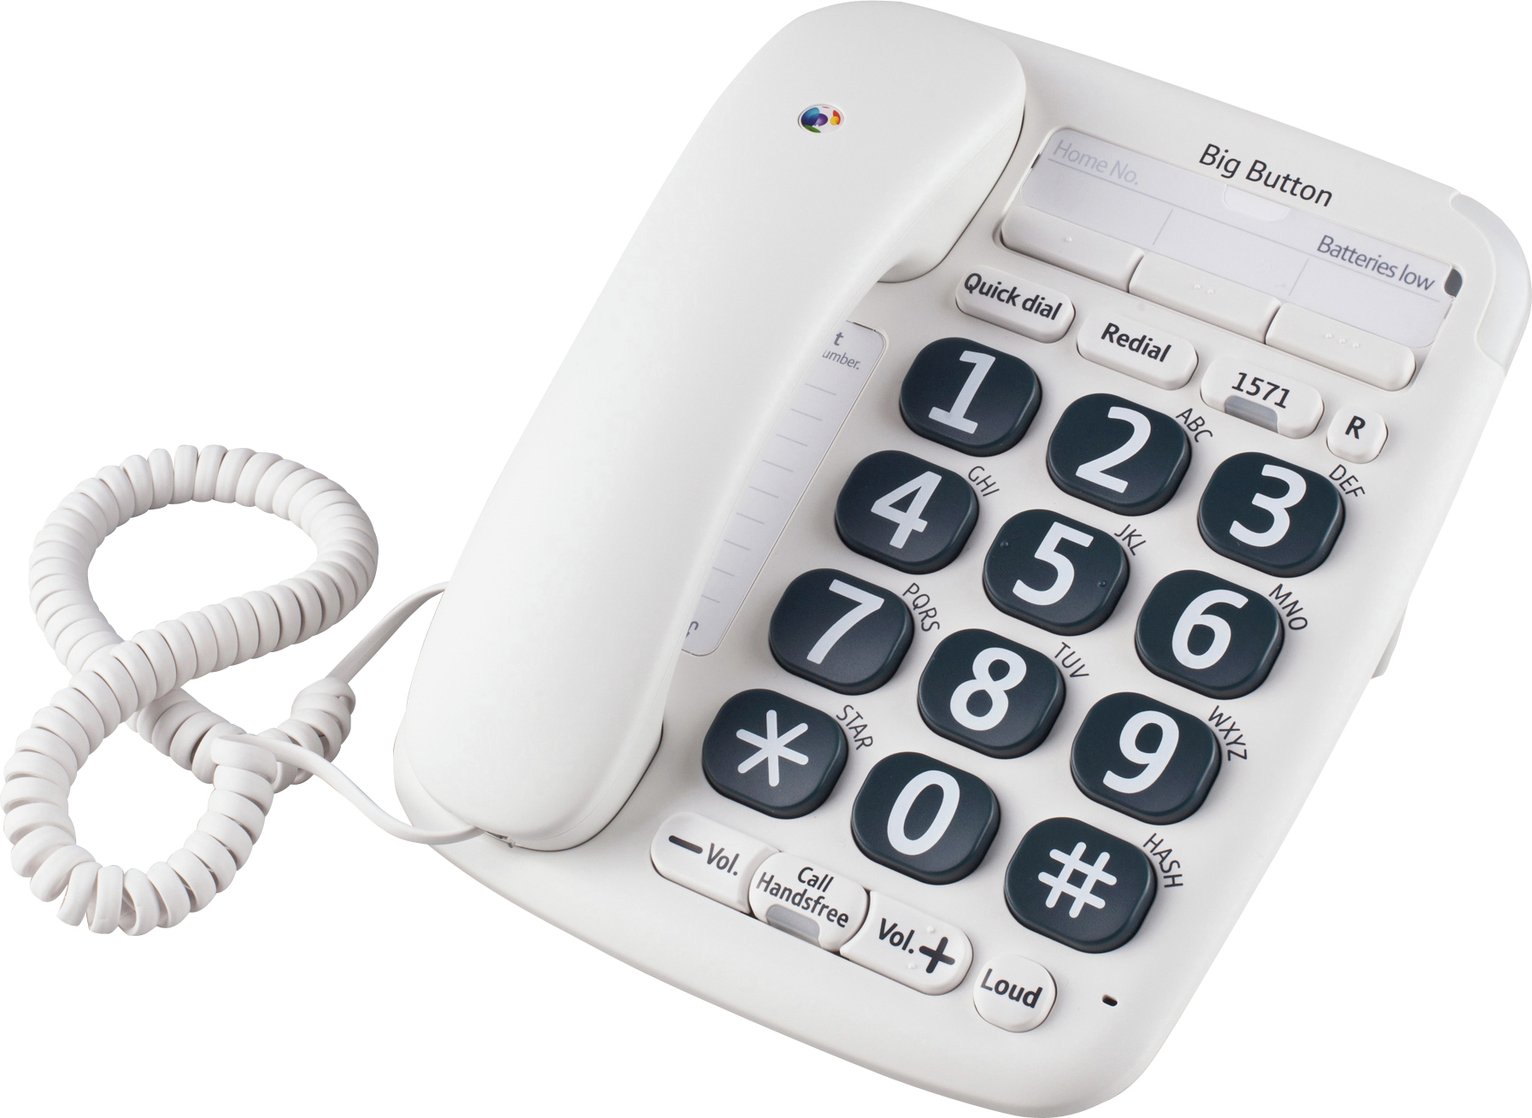 BT 200 Big Button Corded Telephone Review